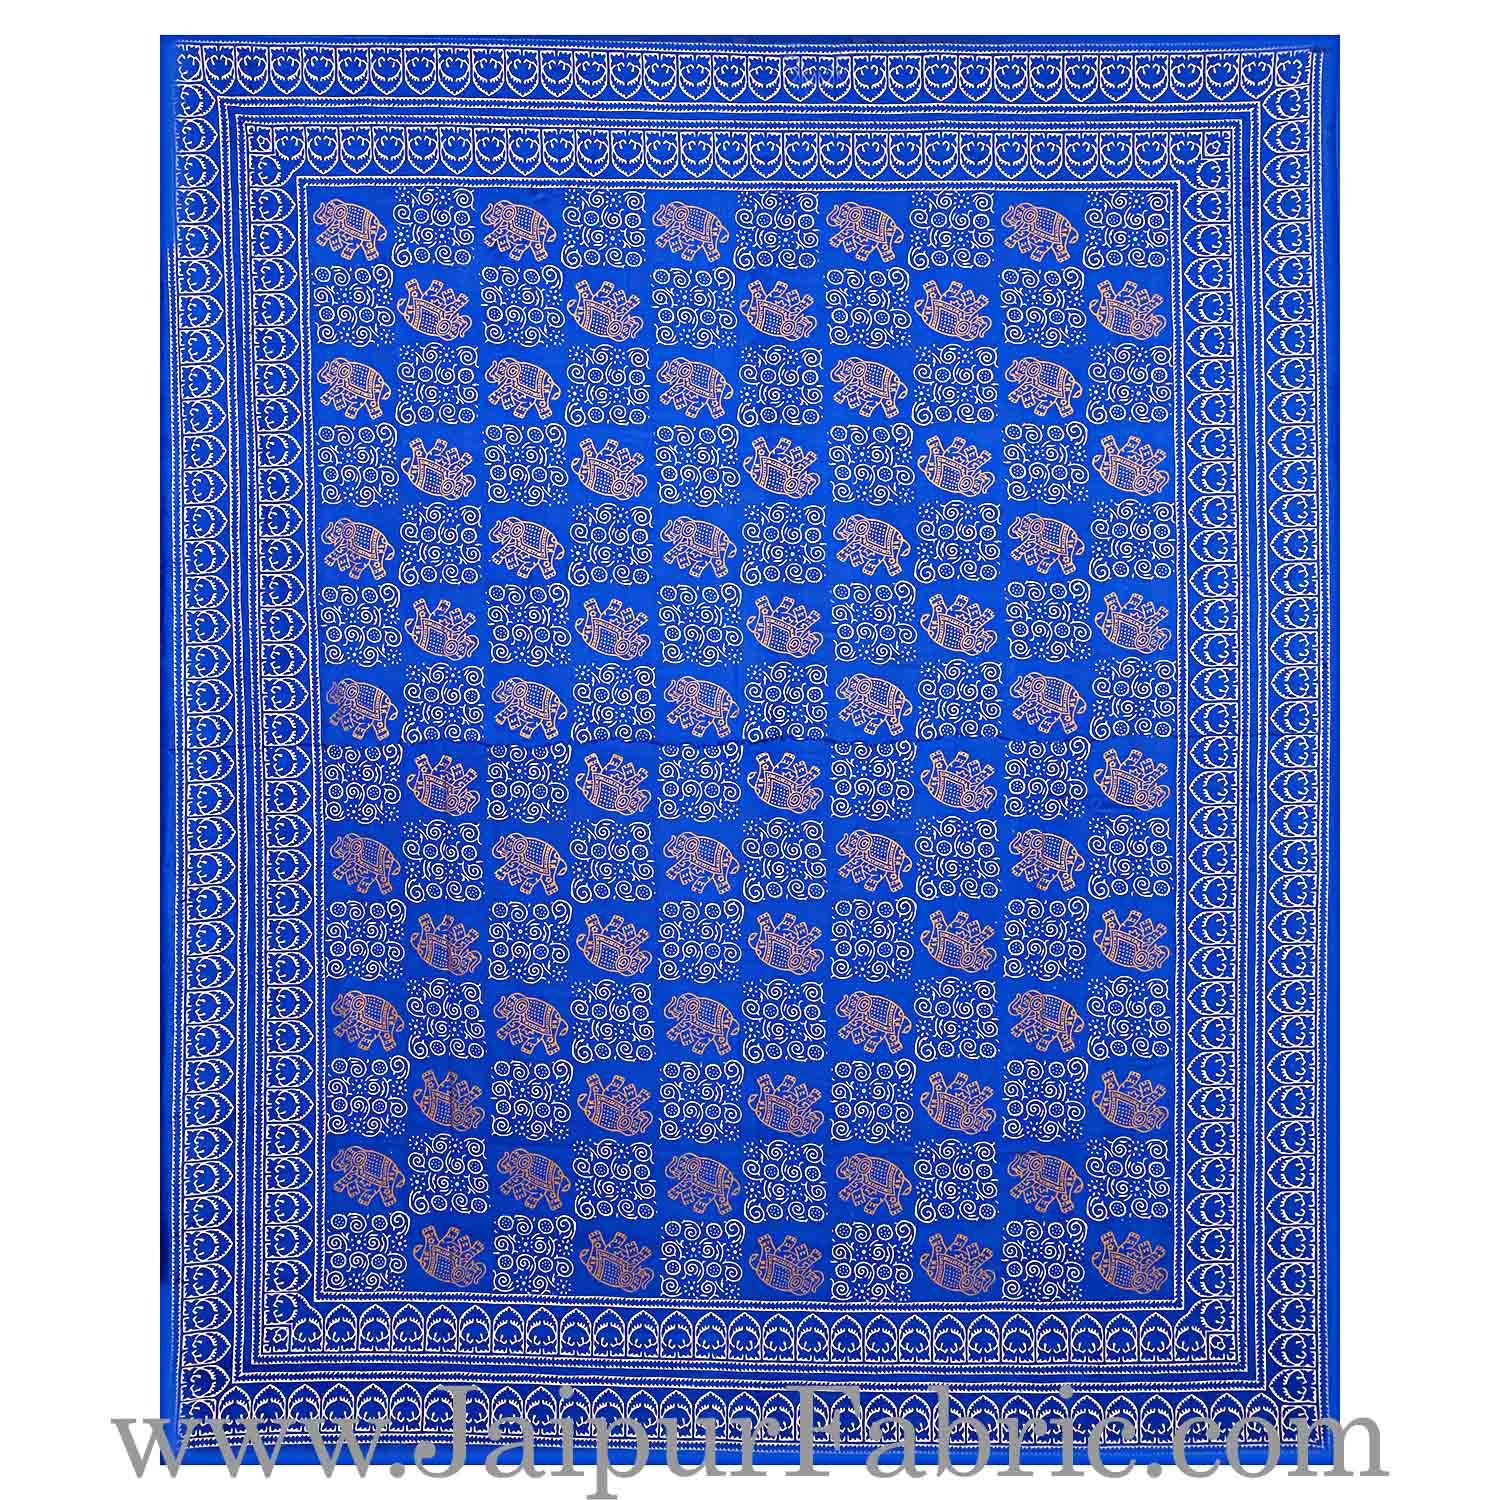 Double Bedsheet Royal Blue Border Golden Elephant Print With Two Pillow Cover